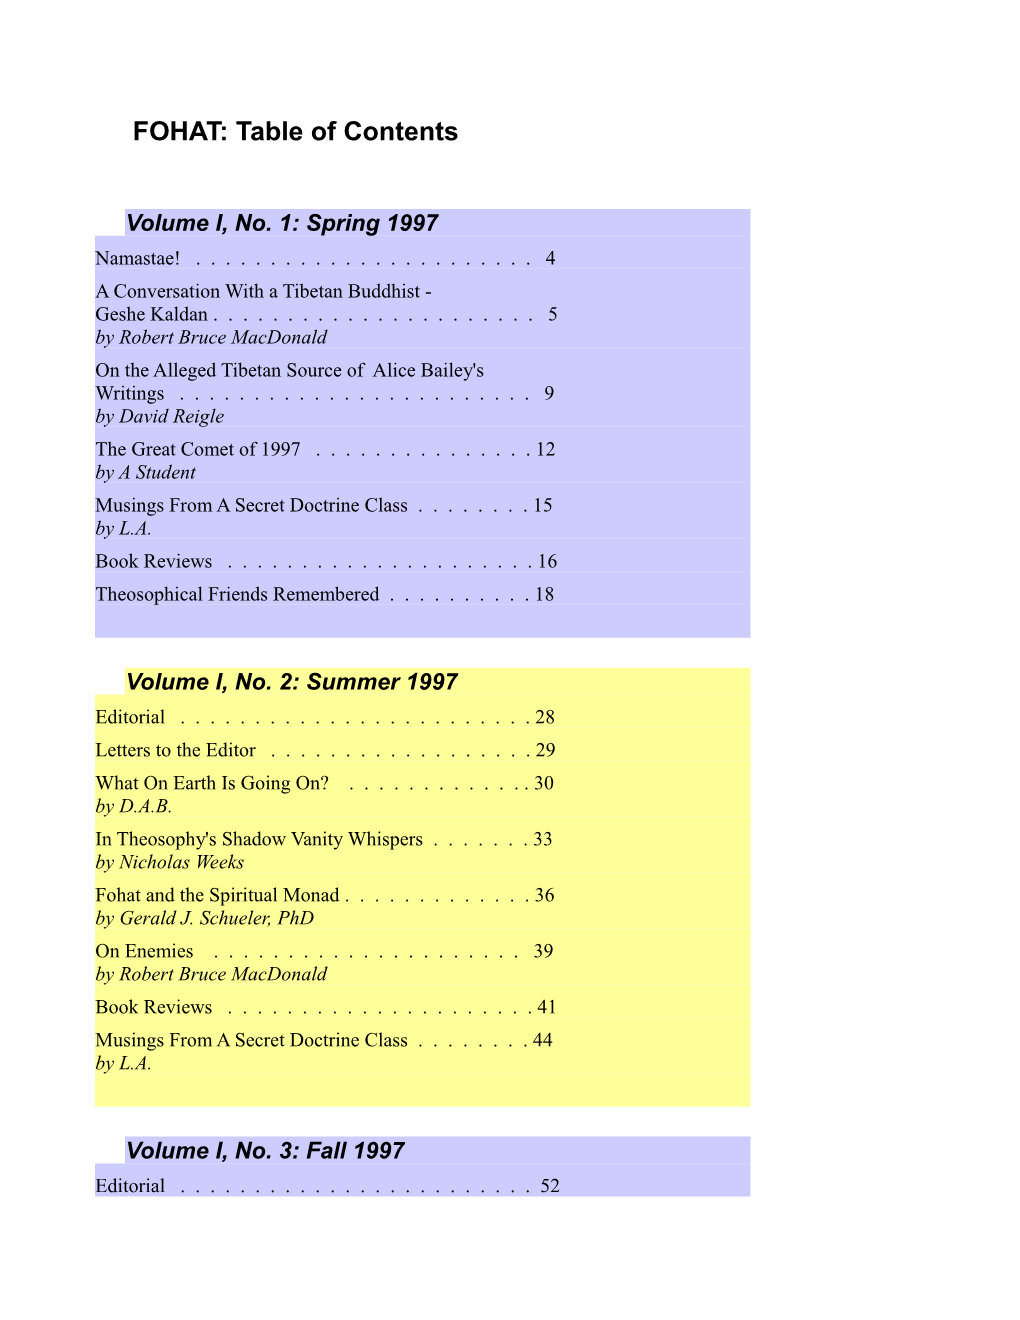 FOHAT: Table of Contents